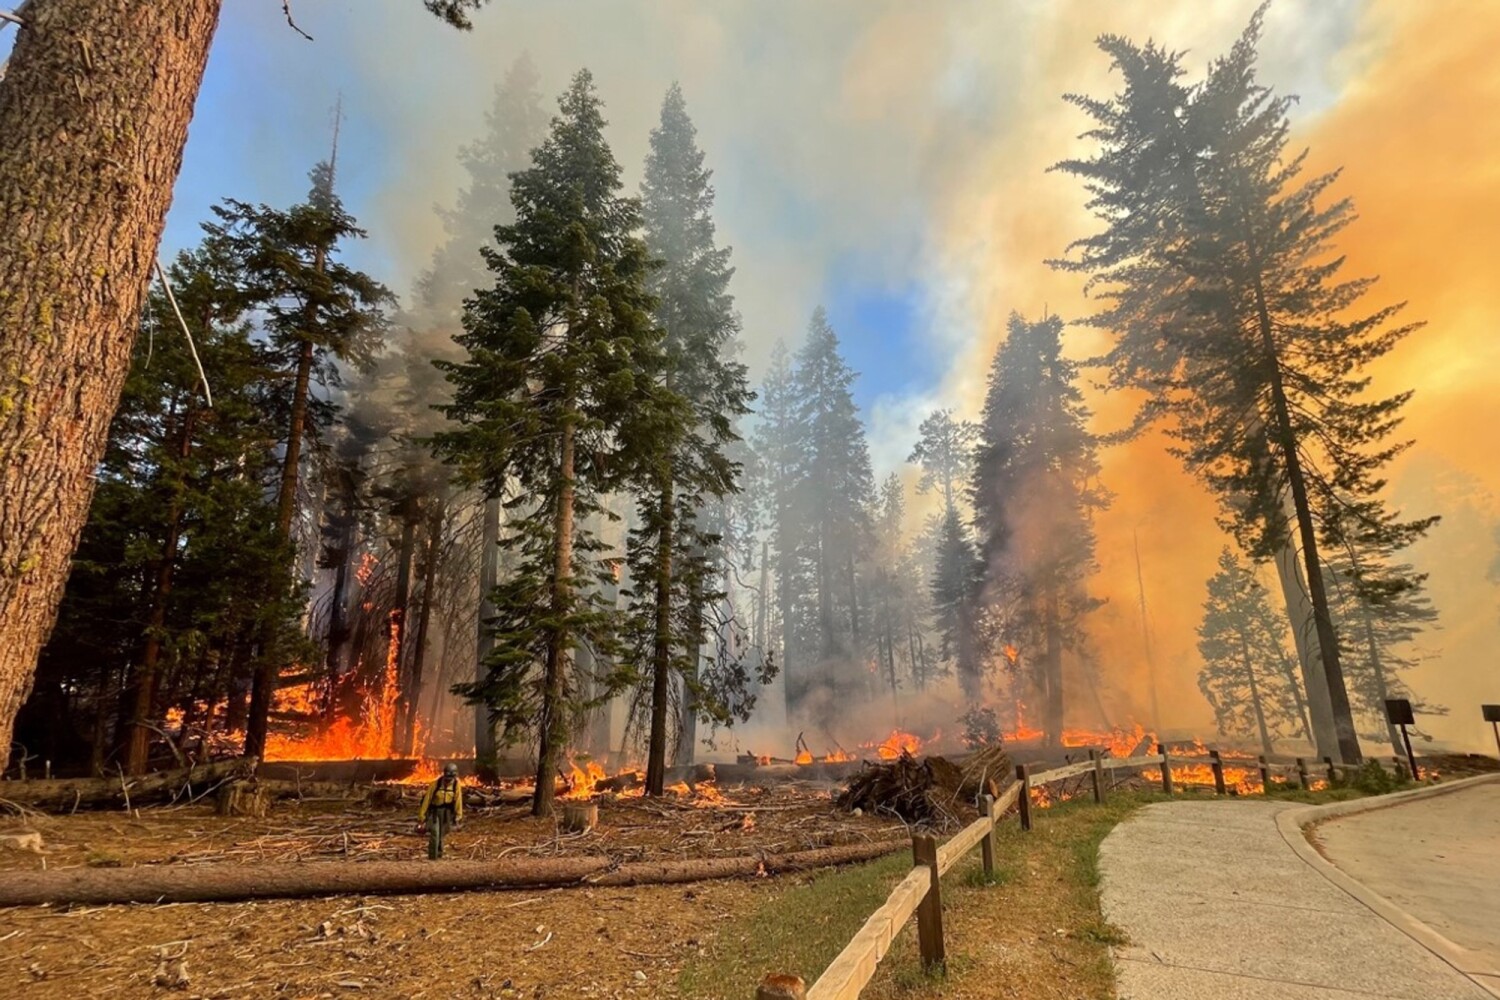 Washburn fire in Yosemite forces evacuations of Wawona, campgrounds